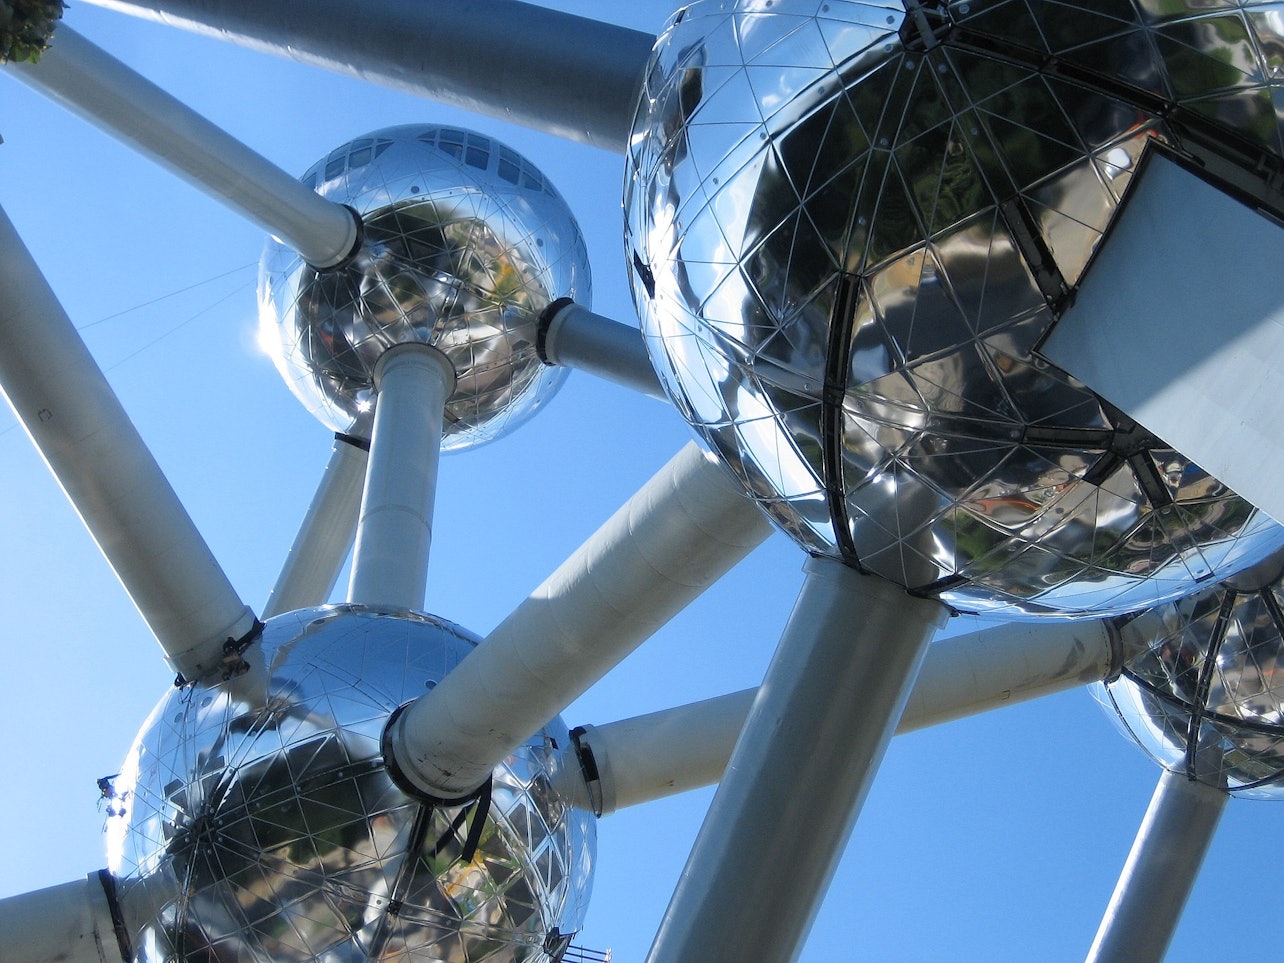 Atomium - Accommodations in Brussels